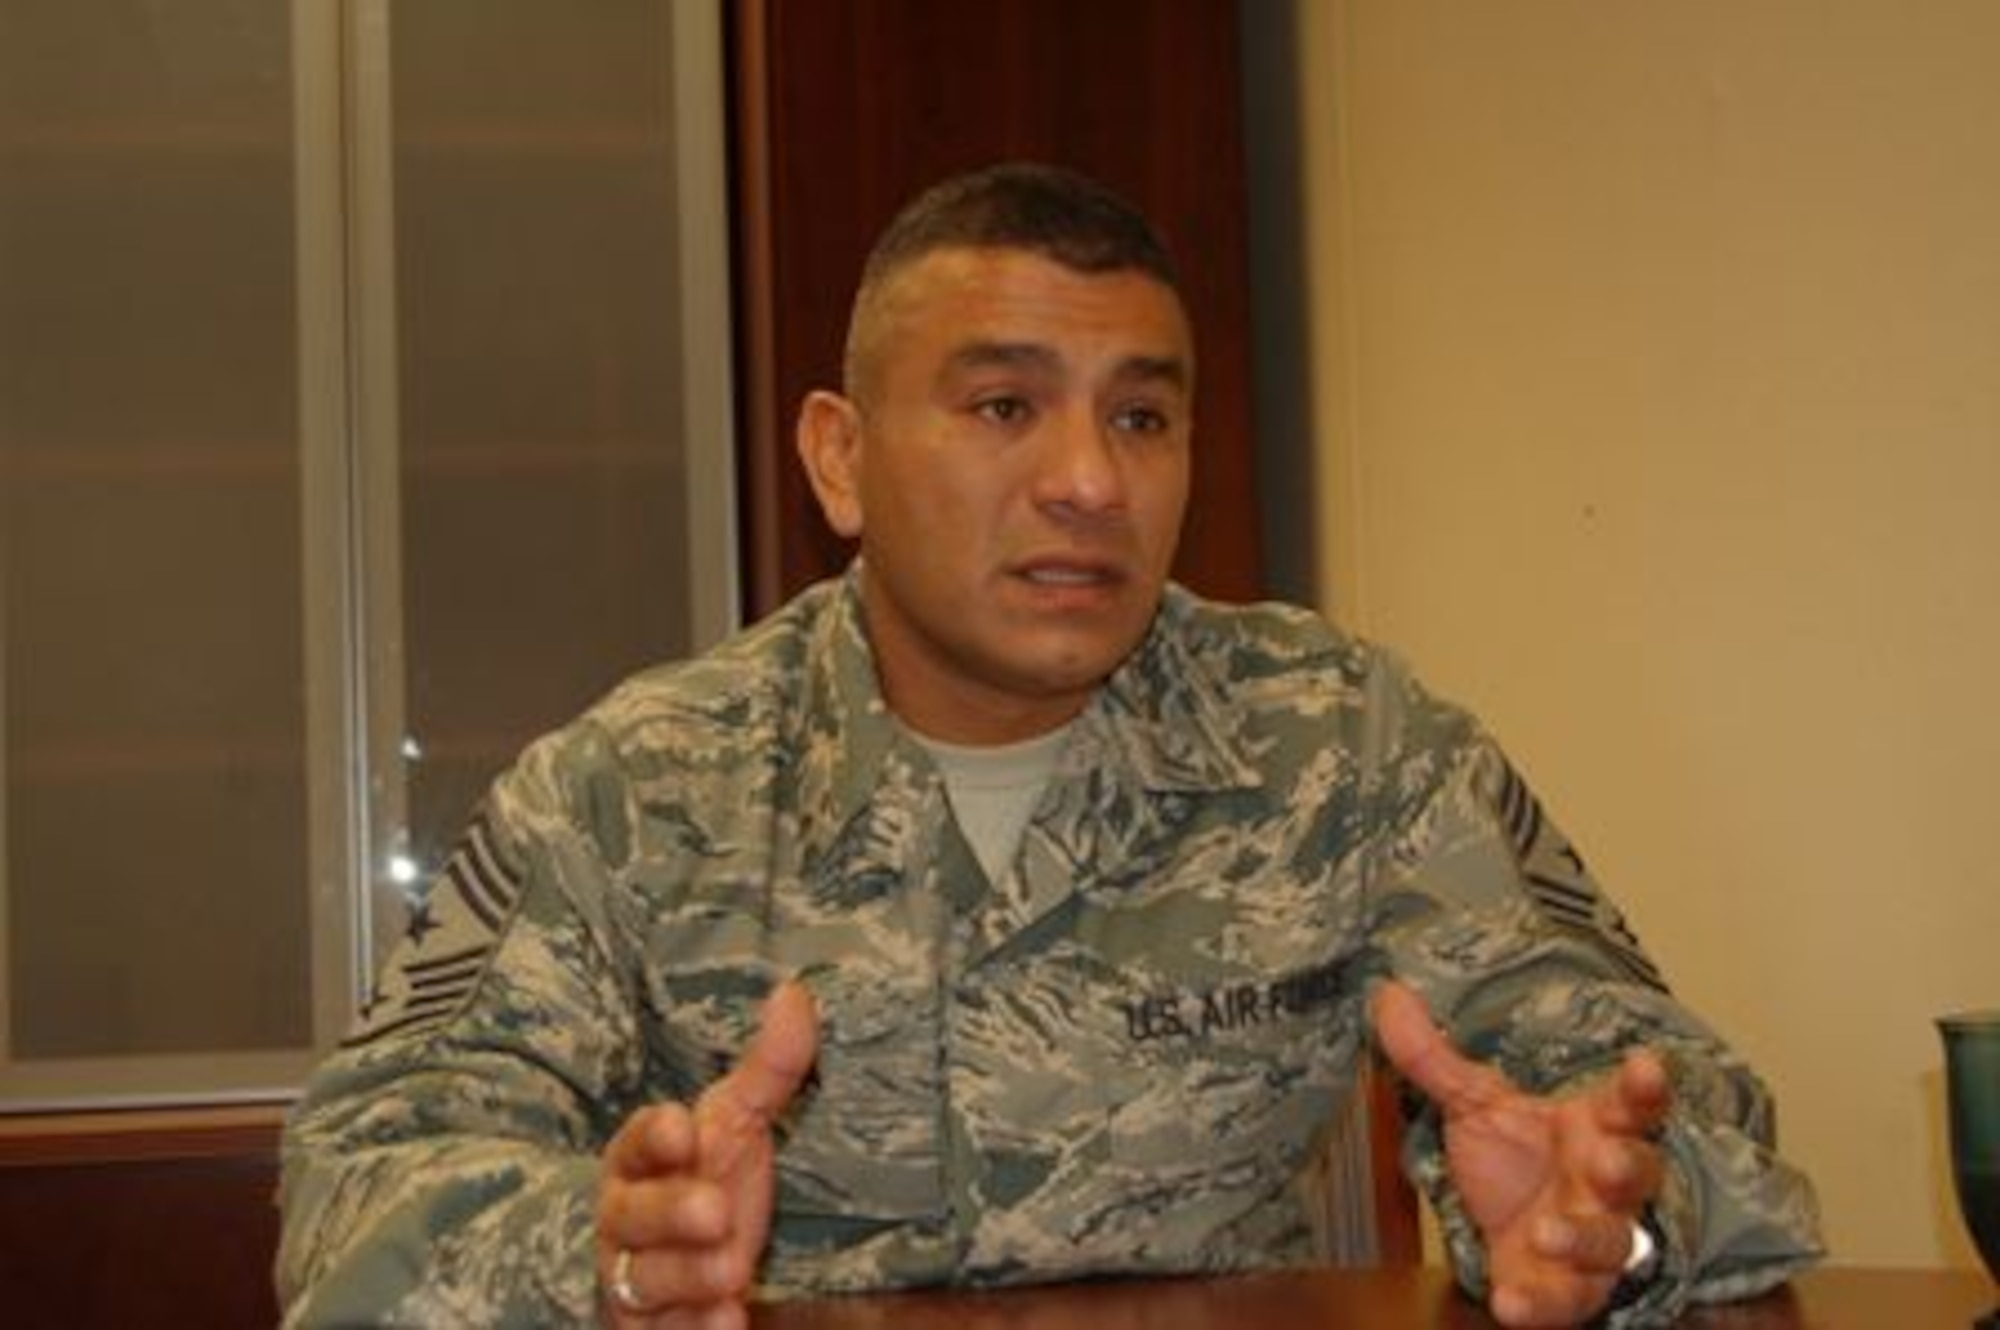 U.S. Air Force Chief Master Sgt. Gerardo Tapia Jr., 12th Air Force (Air Forces Southern) command chief, talks about his new role as the 12th Air Force senior enlisted adviser on Davis-Monthan Air Force Base, Ariz., Nov. 22, 2011. (U.S. Air Force photo by Chief Master Sgt. Gregory Koenig/Released). 